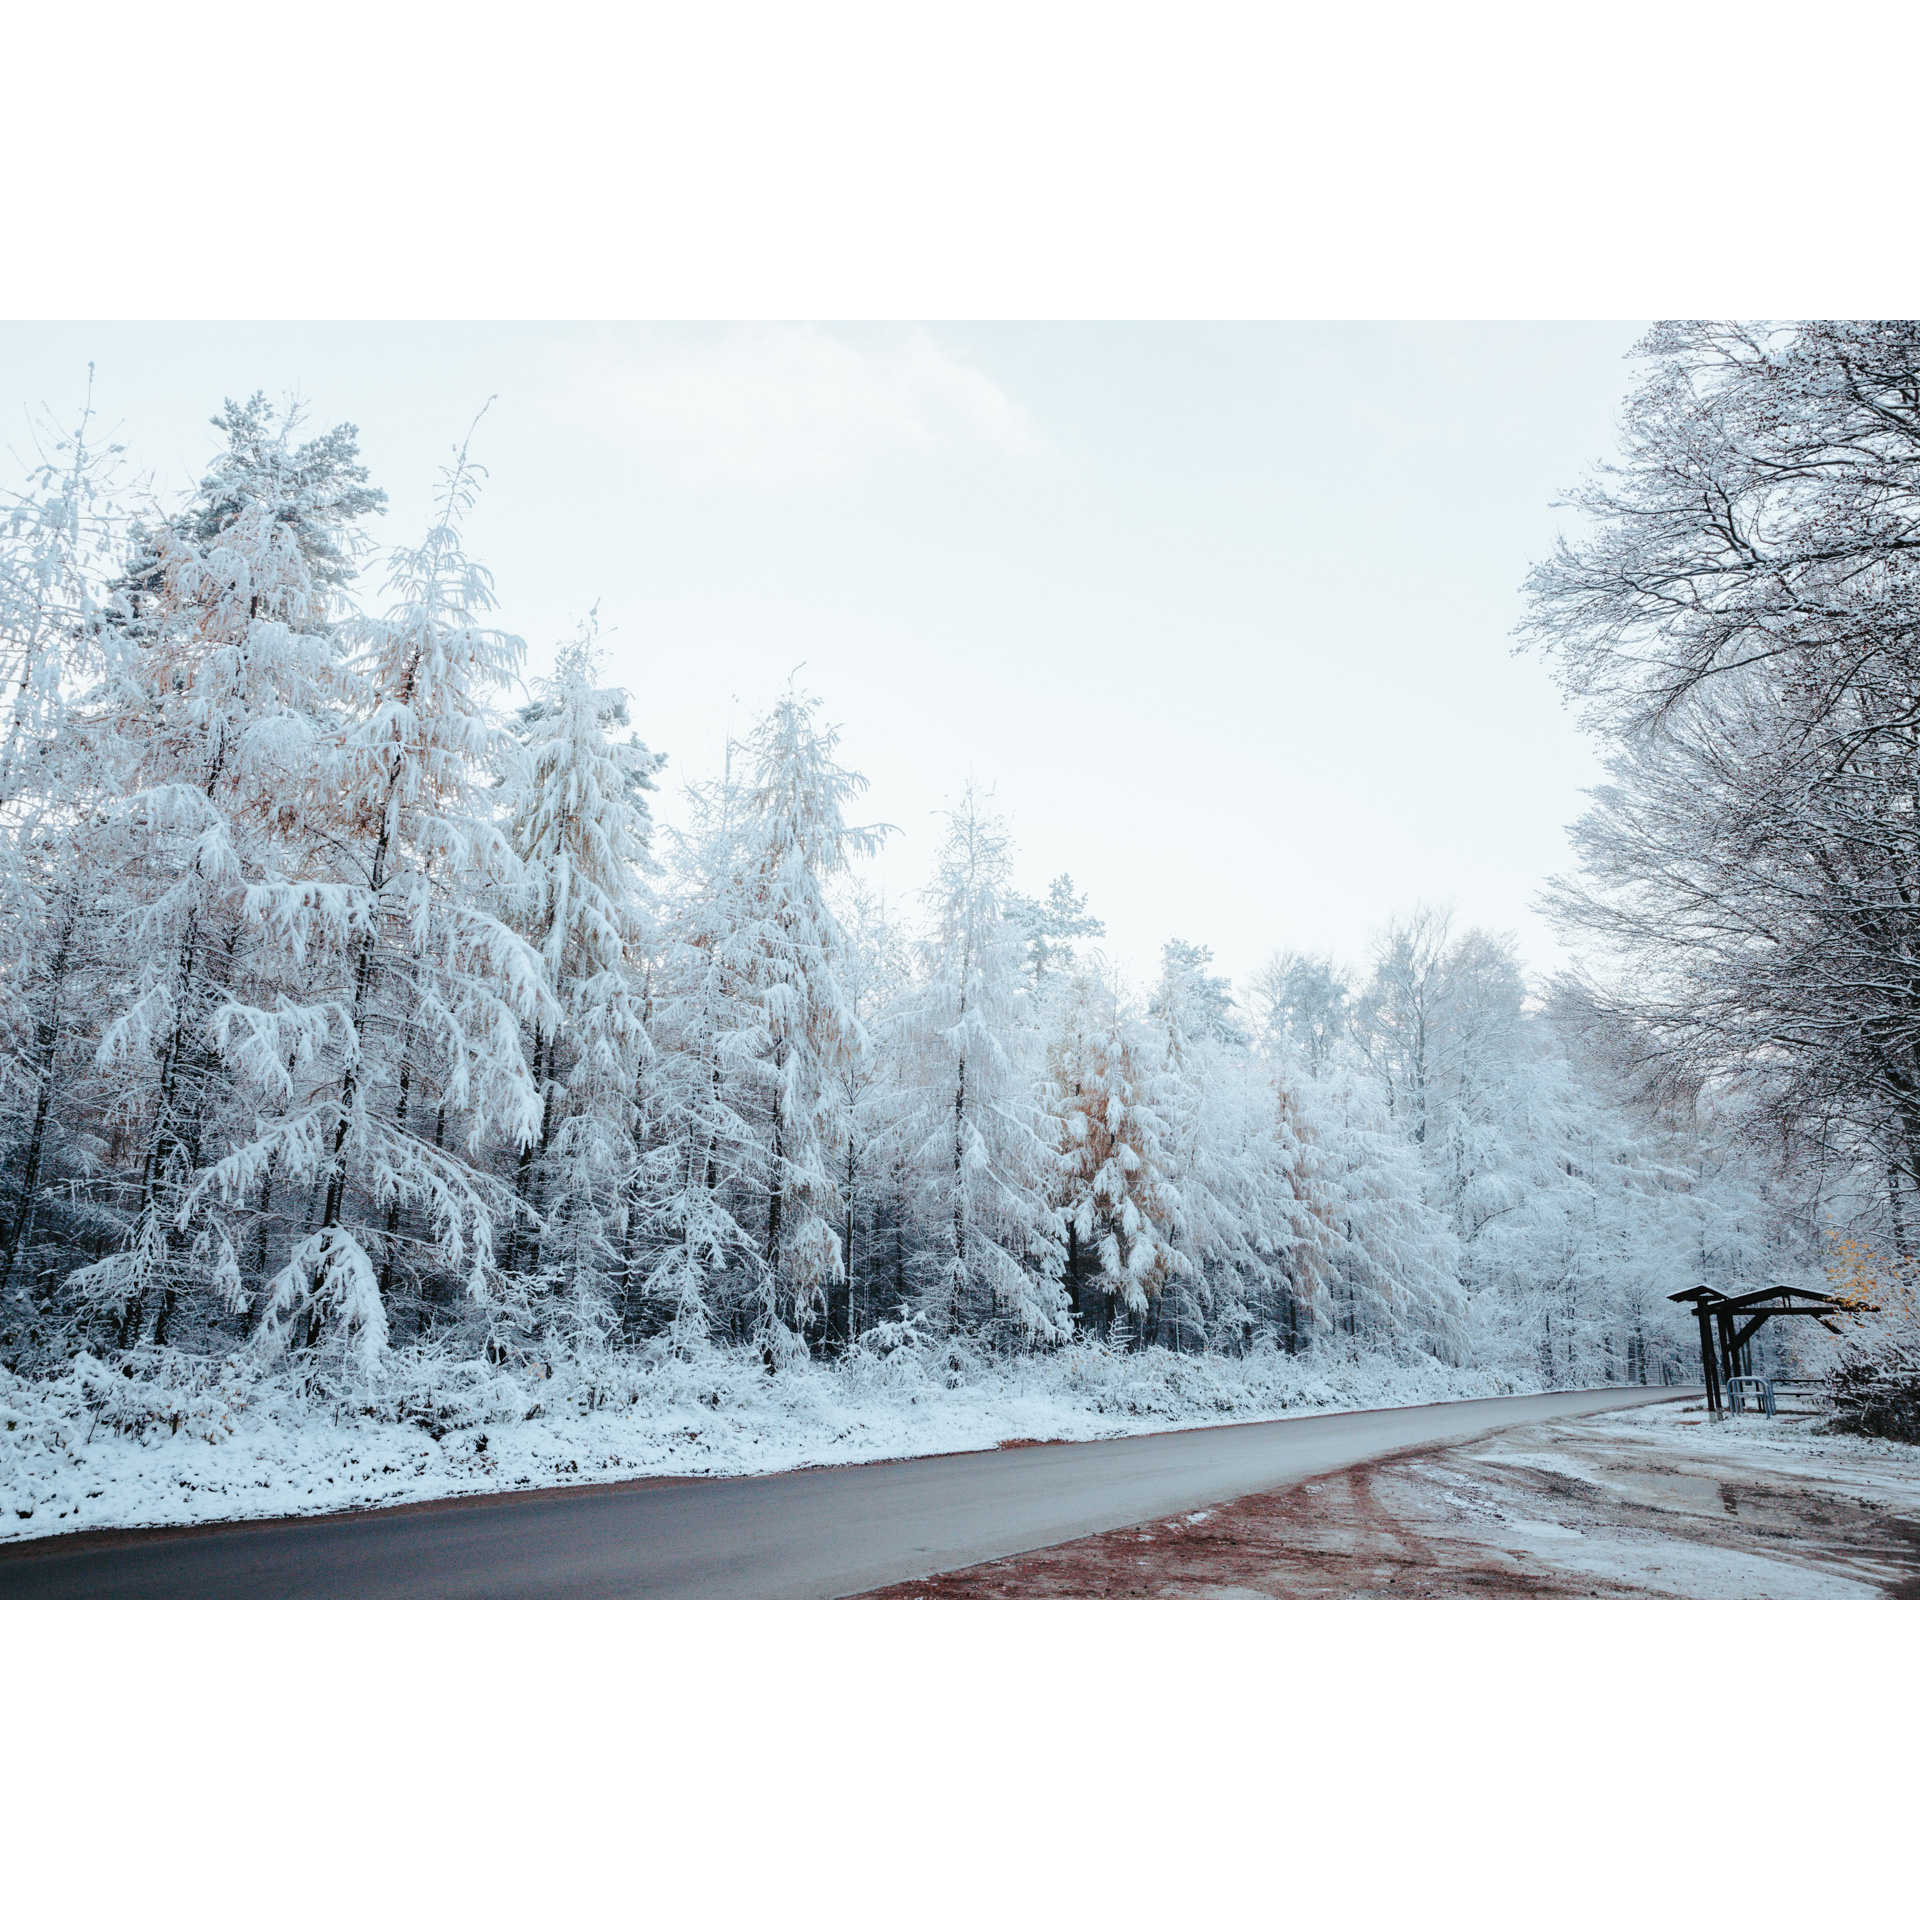 Snow-covered tall coniferous trees growing along the asphalt road